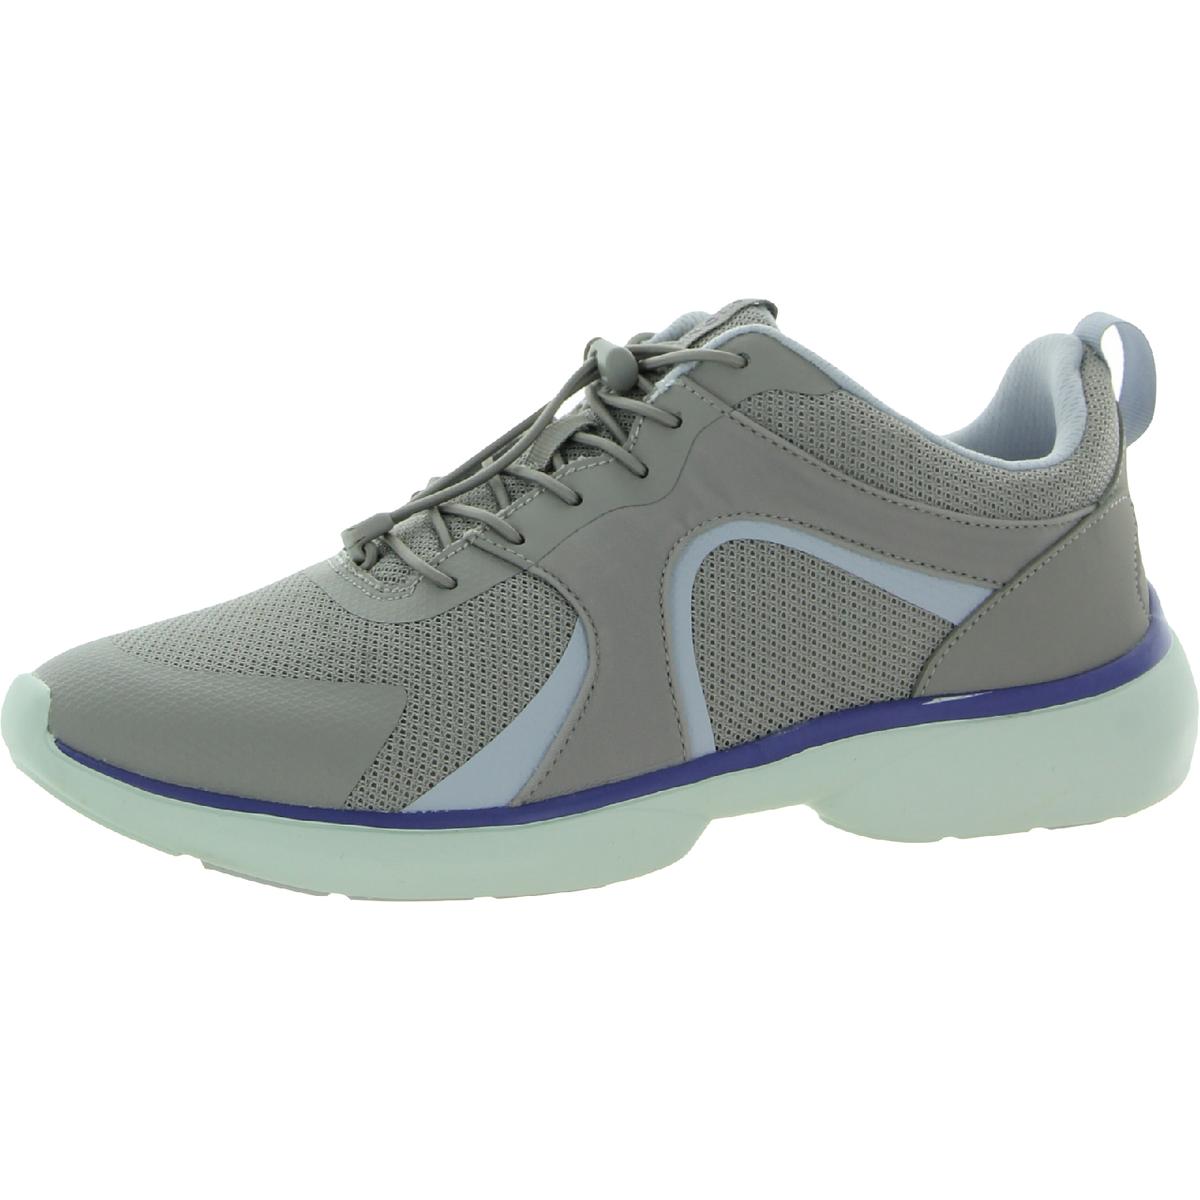 Vionic Womens Olessa Gray Running Shoes Sneakers 6 Wide (C,D,W) BHFO 6840